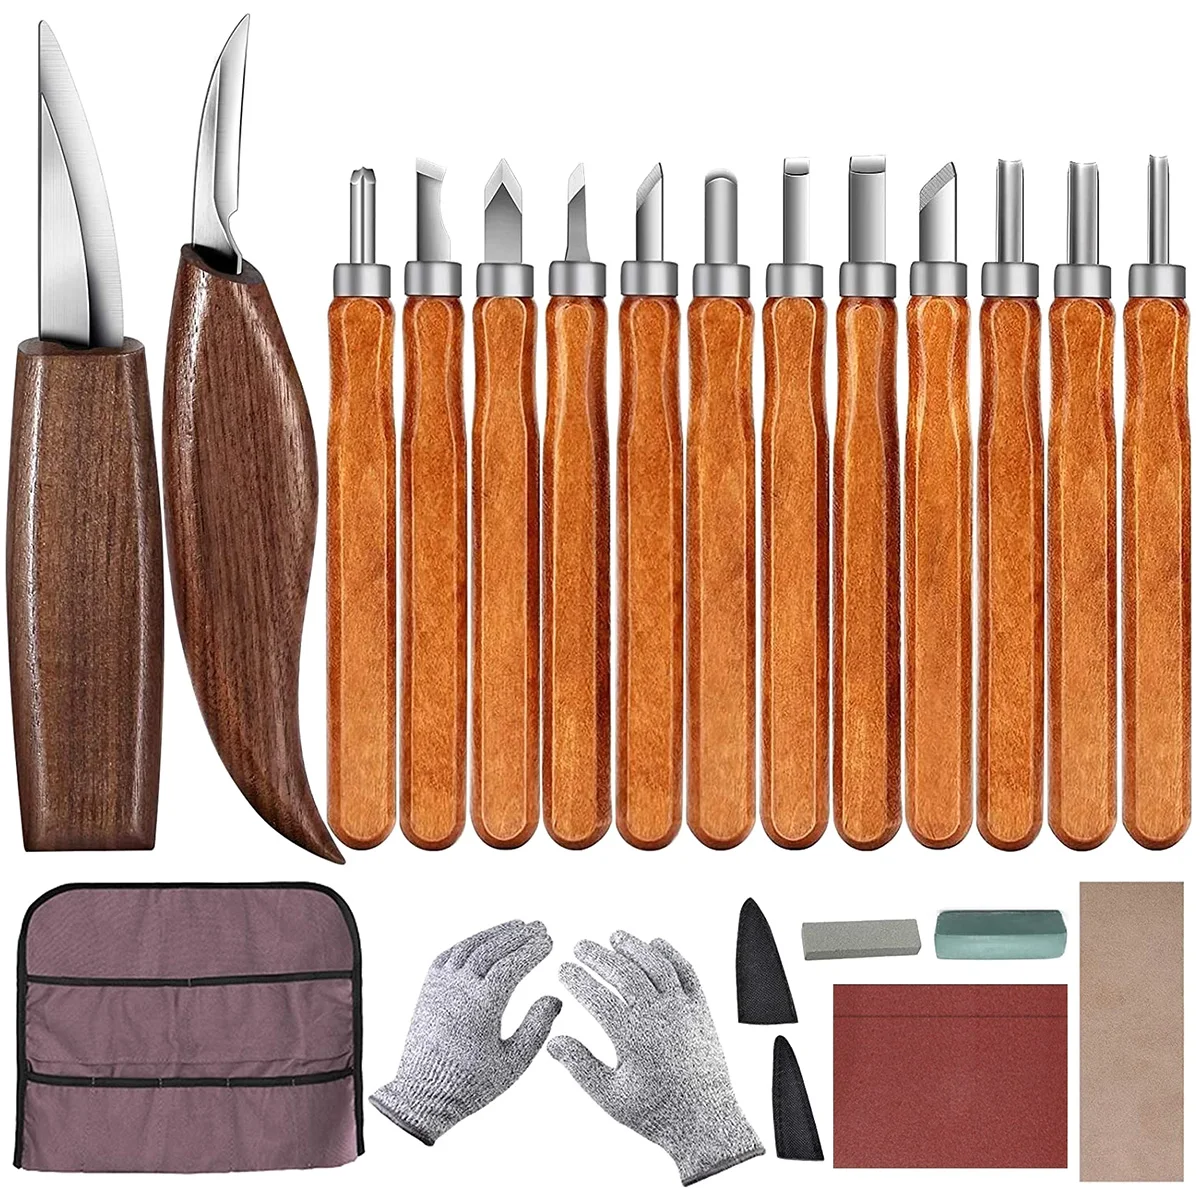 

23pcs Wood Carving Chisel Knife Hand Tool Set For Basic Detailed Carving Woodworkers Gouges Wood Carving Tool Set